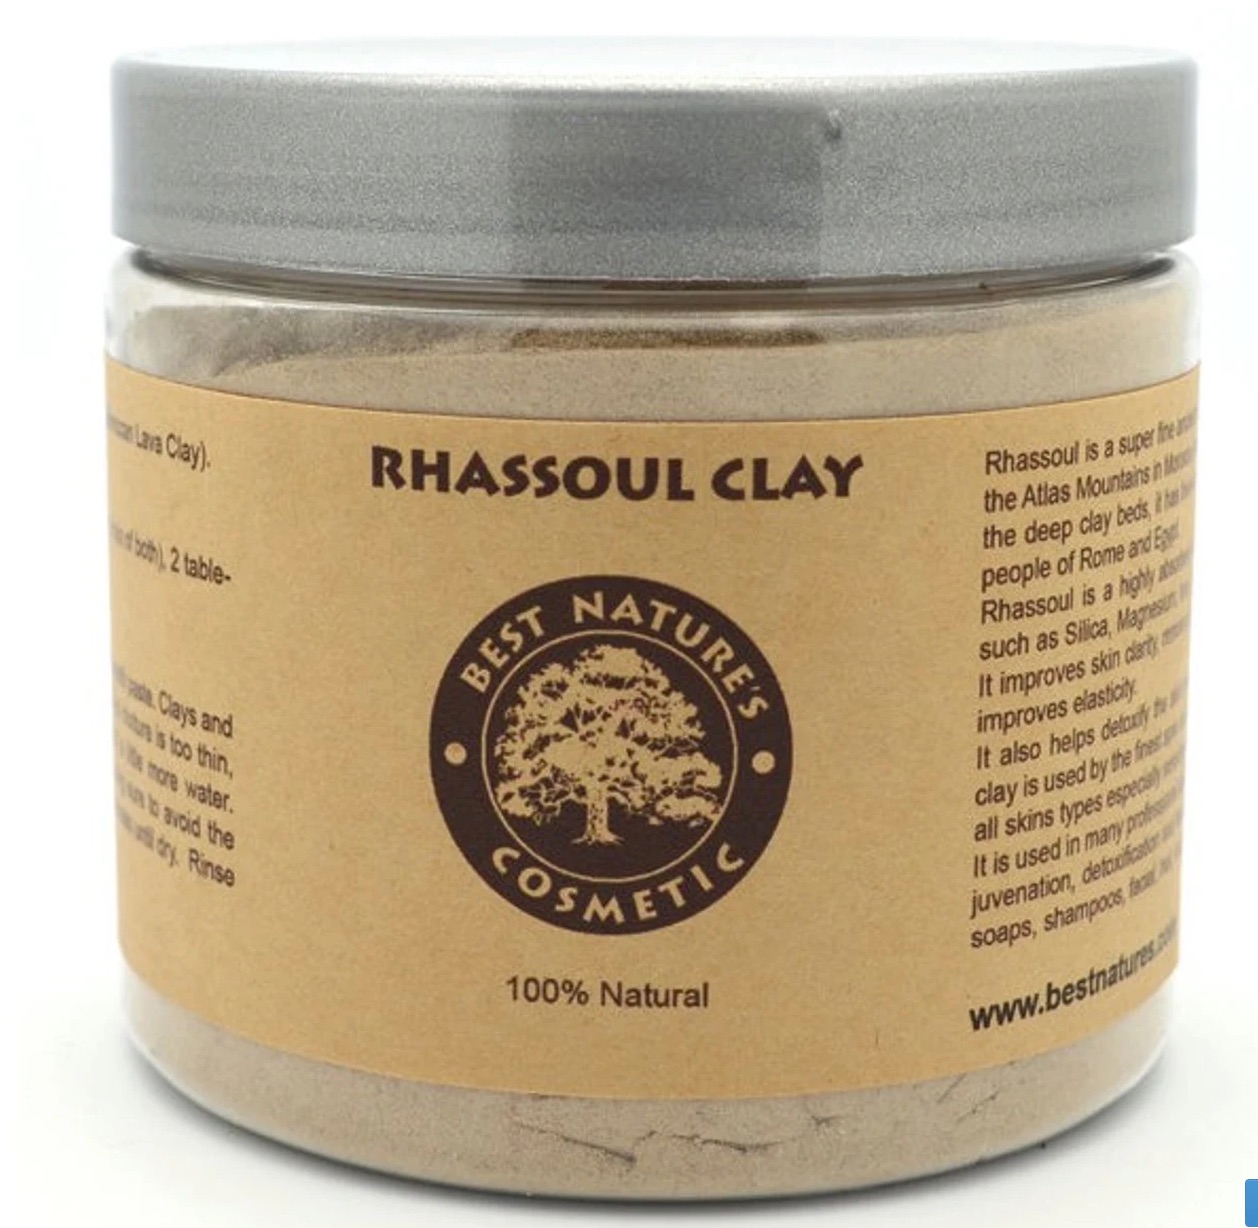 Moroccan Rhassoul Lava Clay Face Mask Body Wrap Etsy